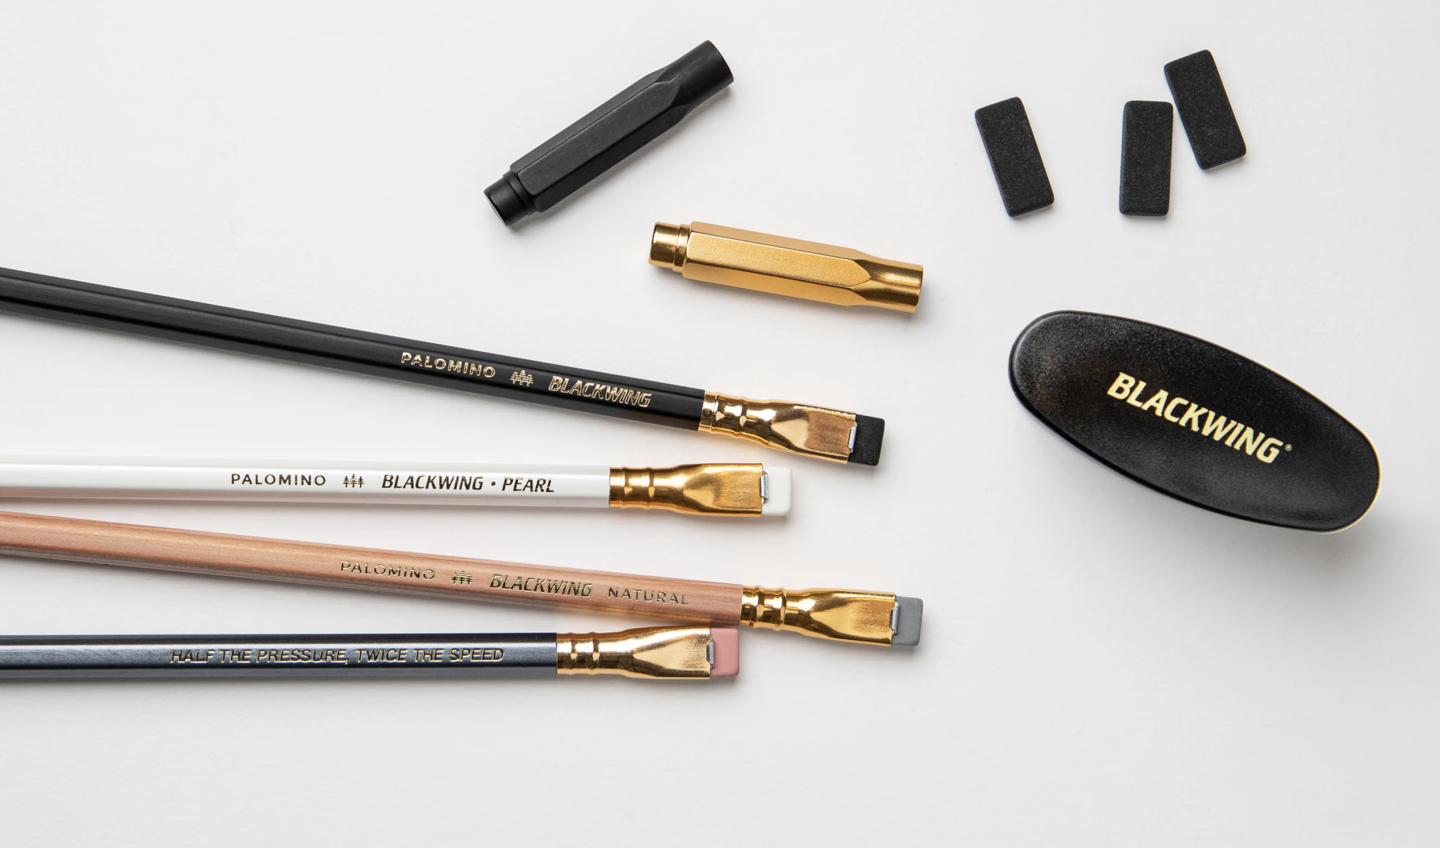 What makes Blackwing's pencil so special?